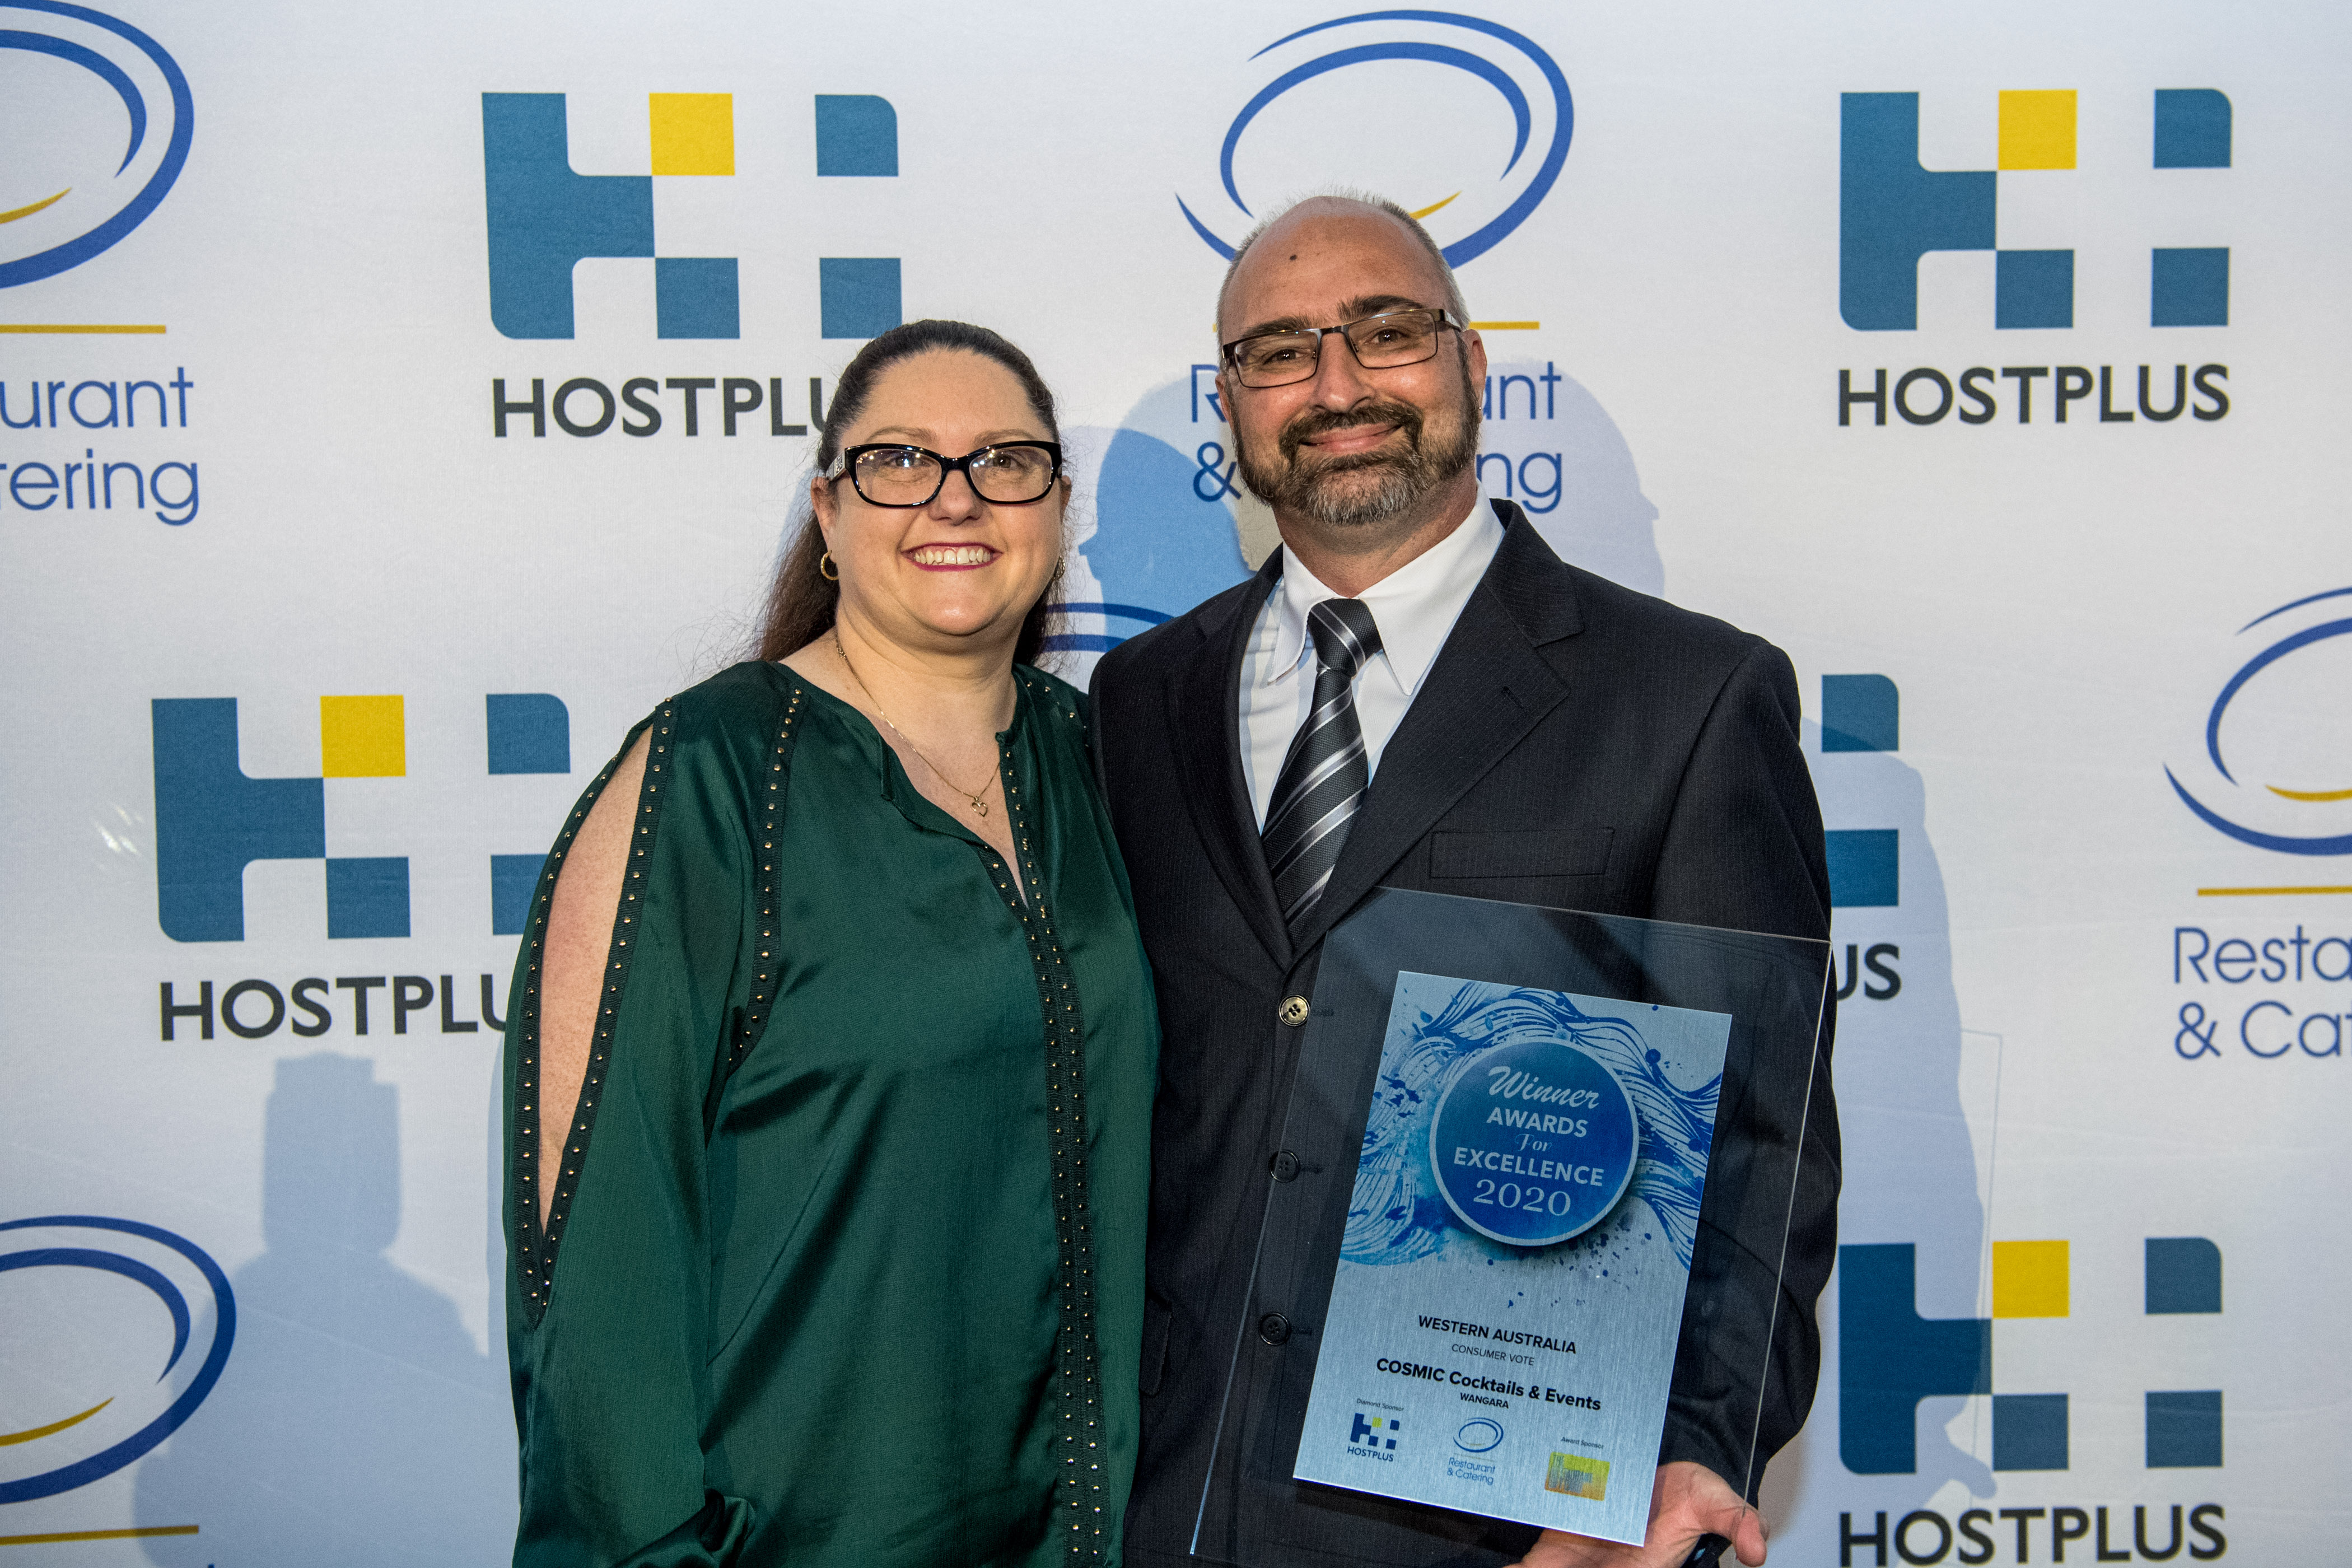 Clint Gurney & Tanya Gurney From COSMIC Cocktails & Events Win Consumer Vote Award 2020